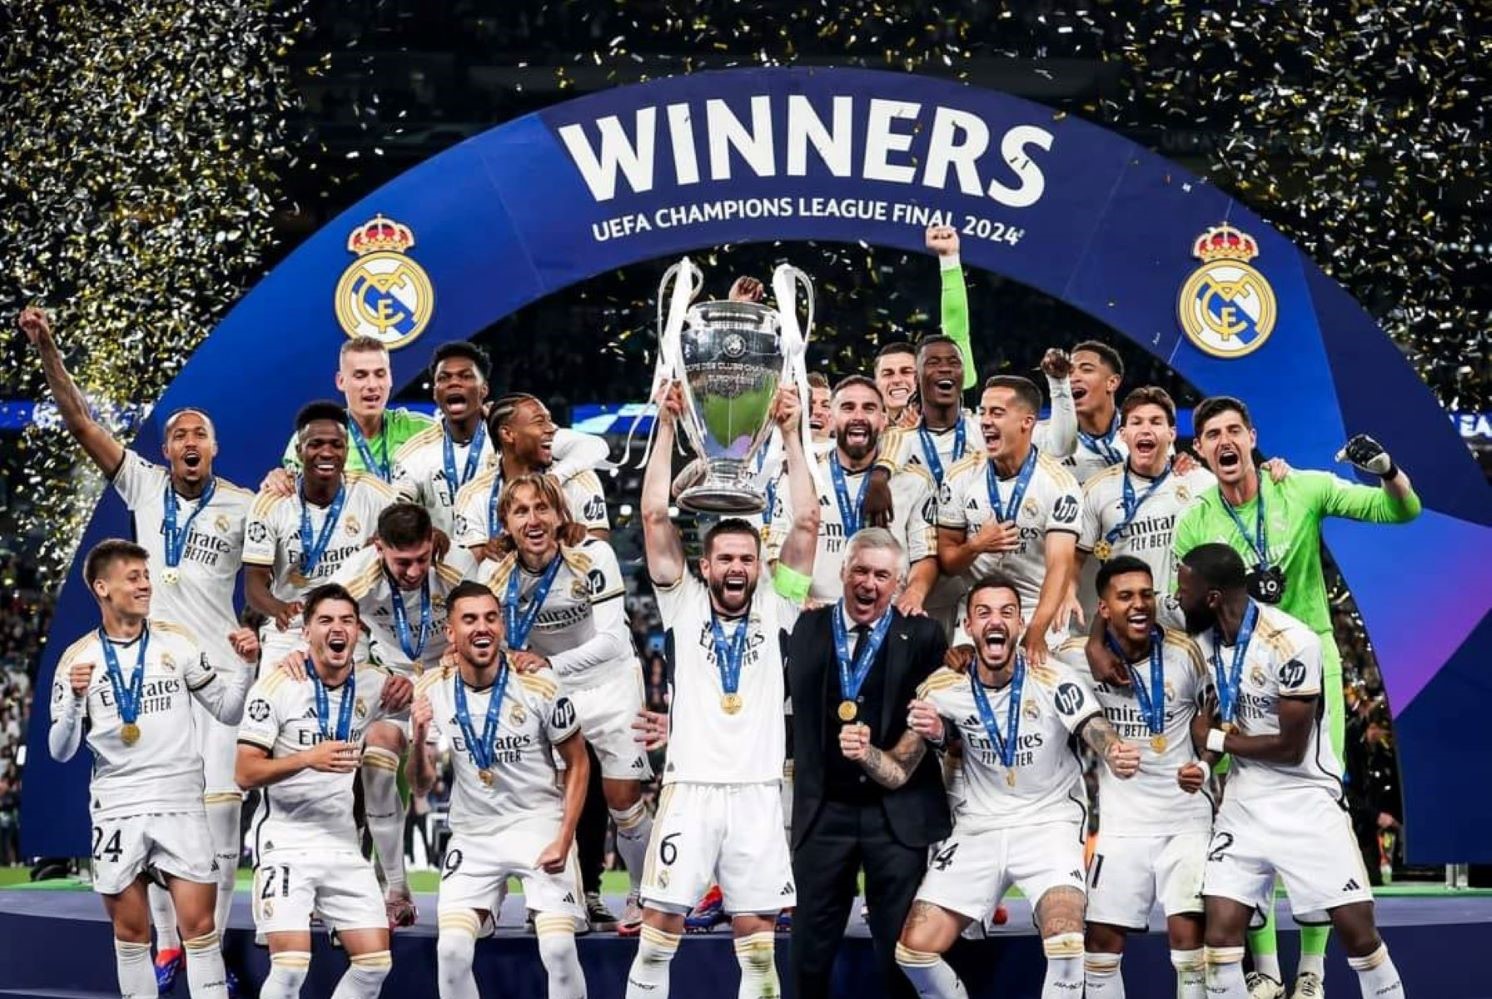 Real Madrid win record-extending 15th Champions League title, beat Borussia Dortmund 2-0 in the final